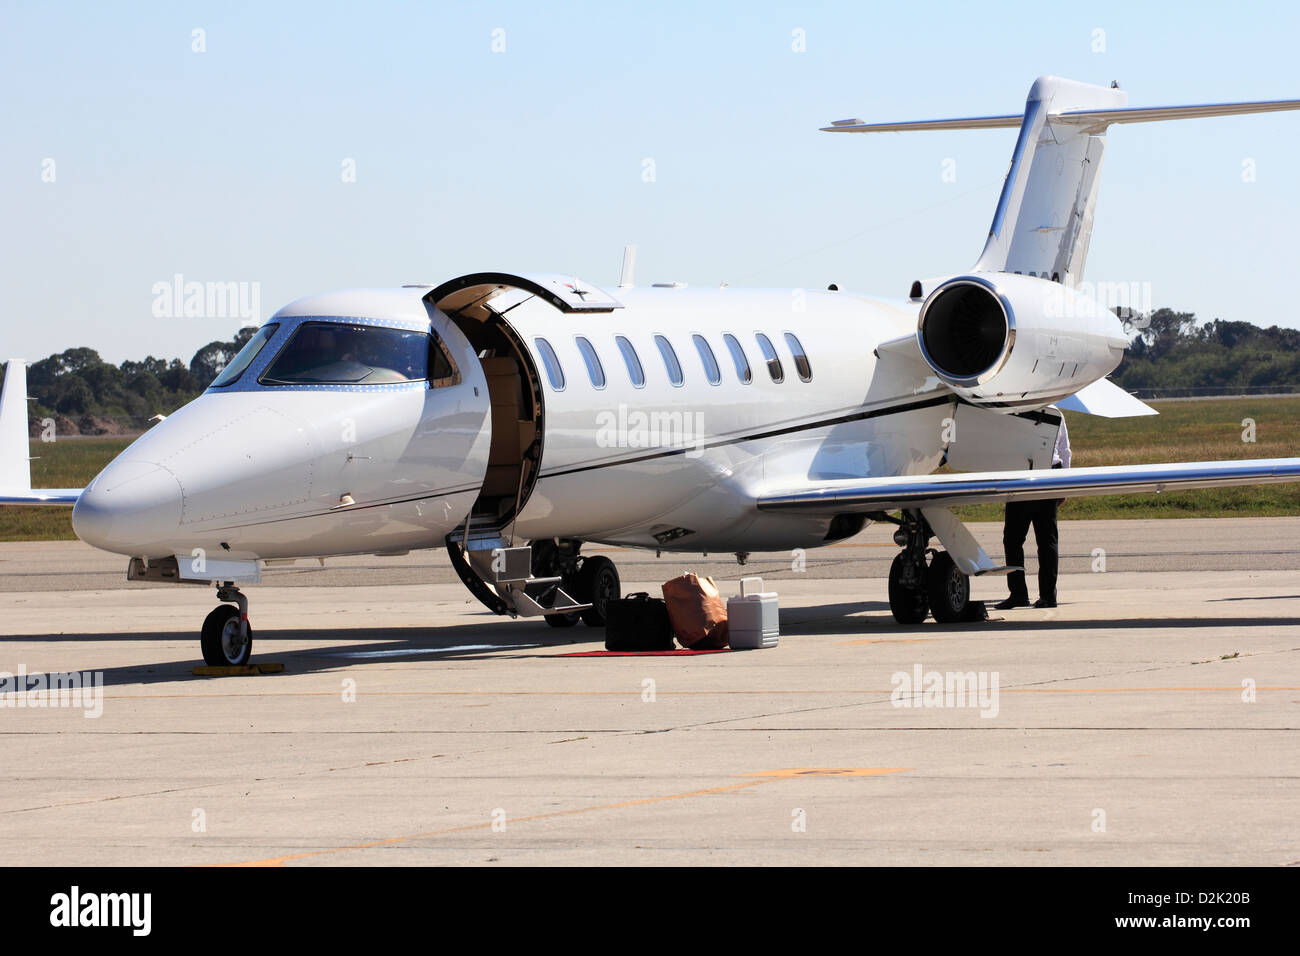 A Learjet 45 business jet aircraft Stock Photo